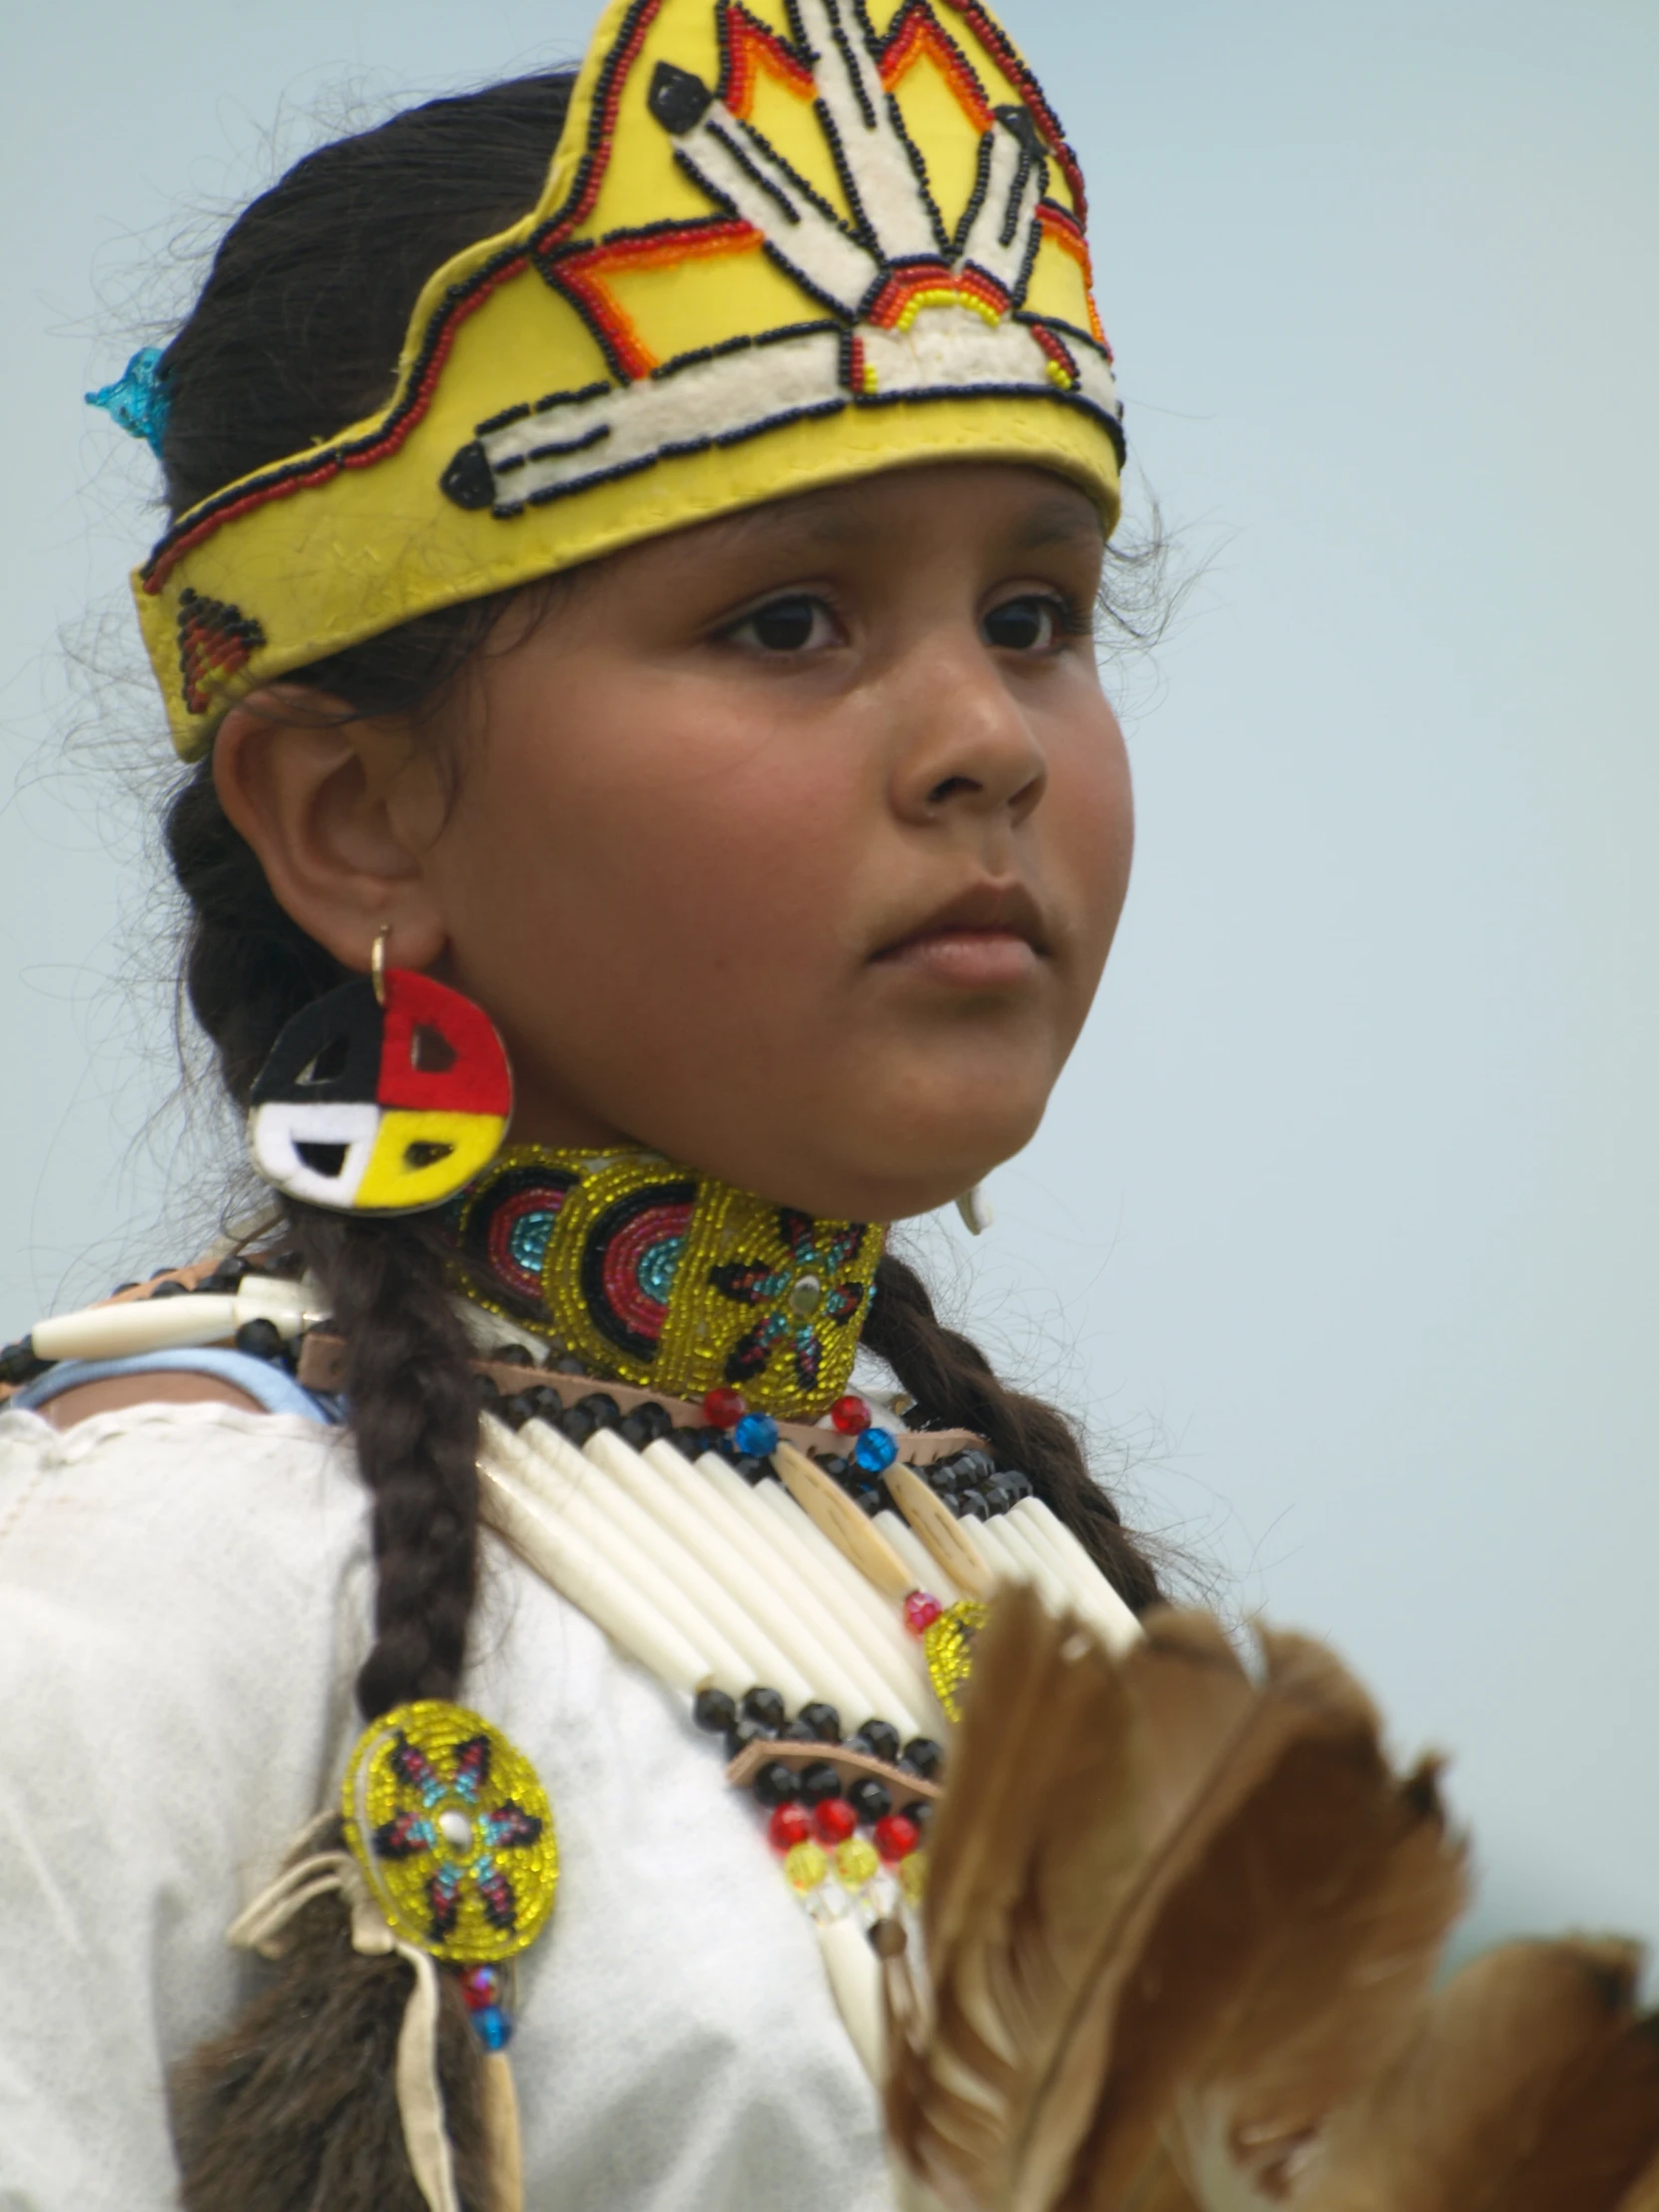 a little girl in native clothing and headgear